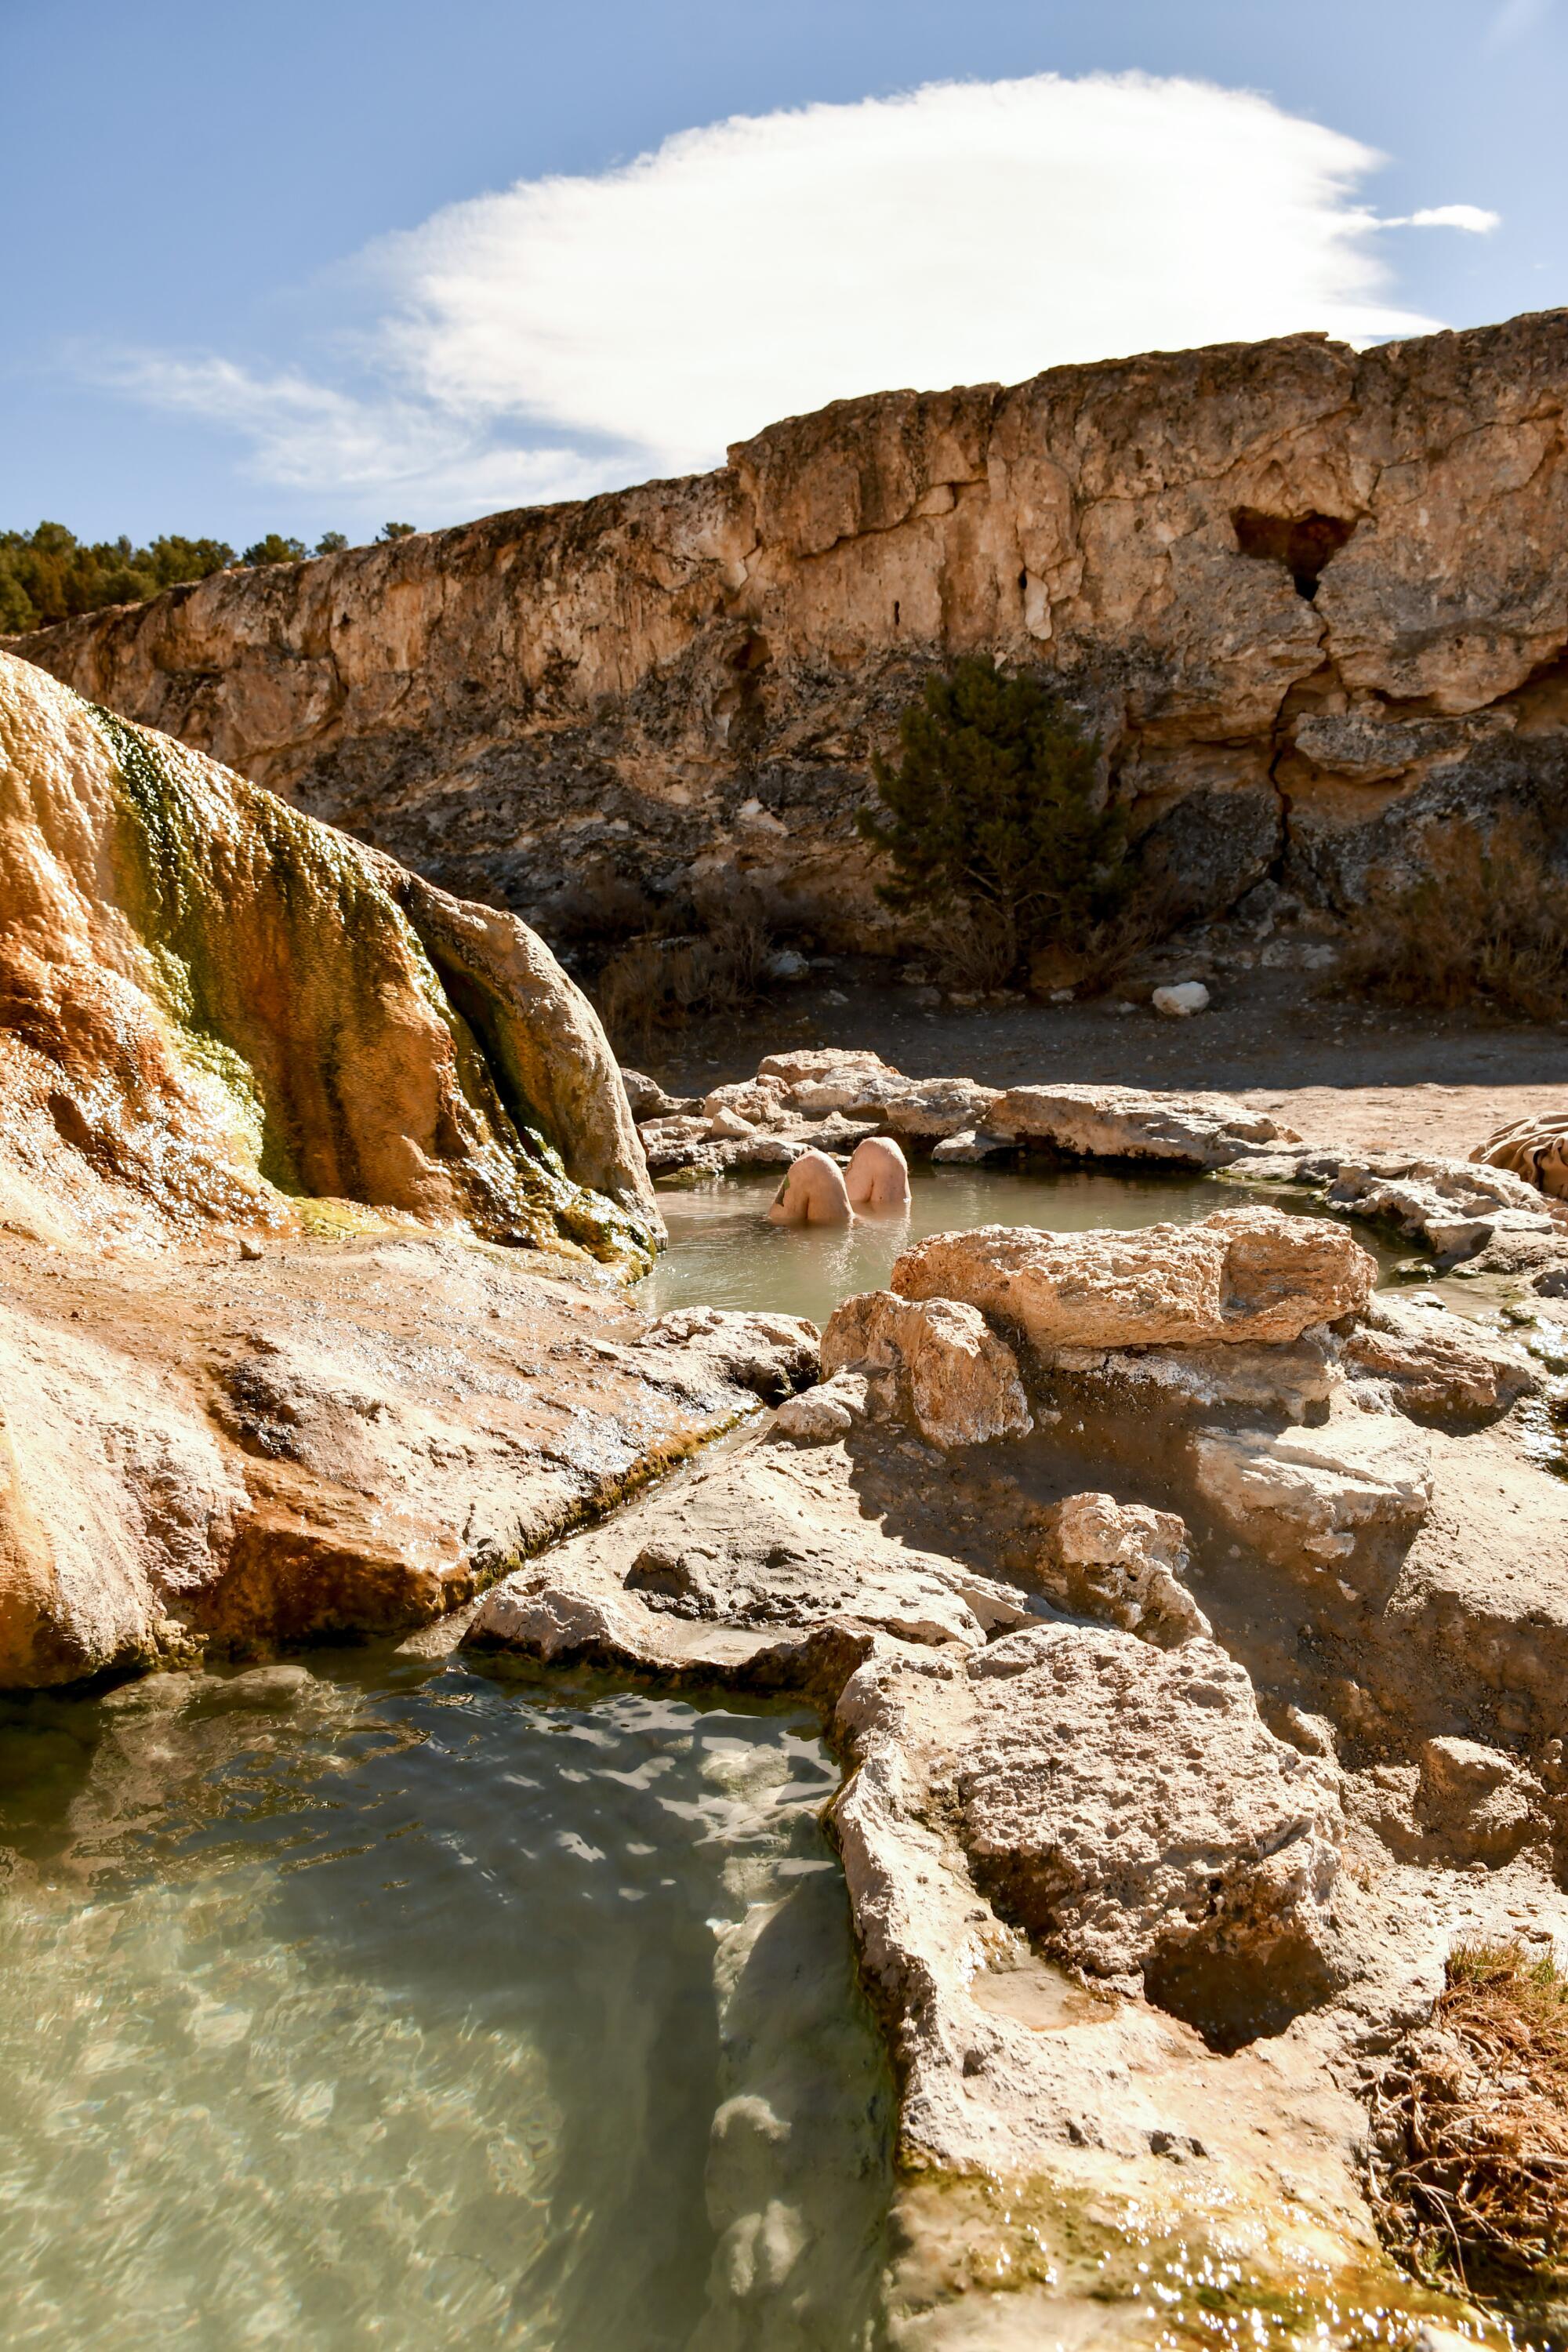 Travertine Hot Springs, open for soaking, are found just south of Bridgeport along Highway 395, north of Mono Lake.